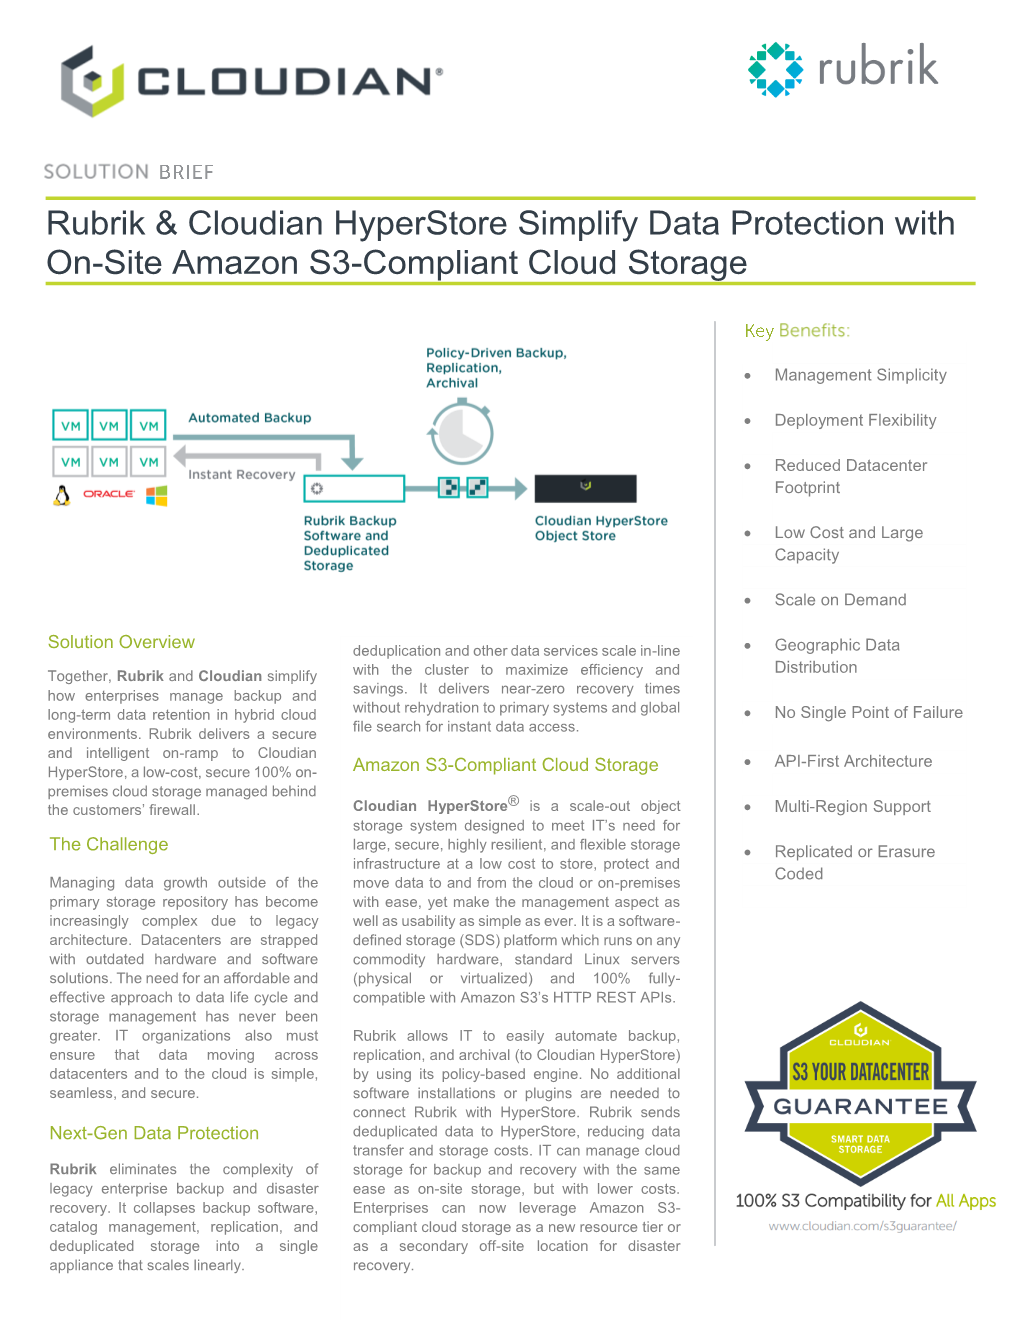 Rubrik & Cloudian Hyperstore Simplify Data Protection with On